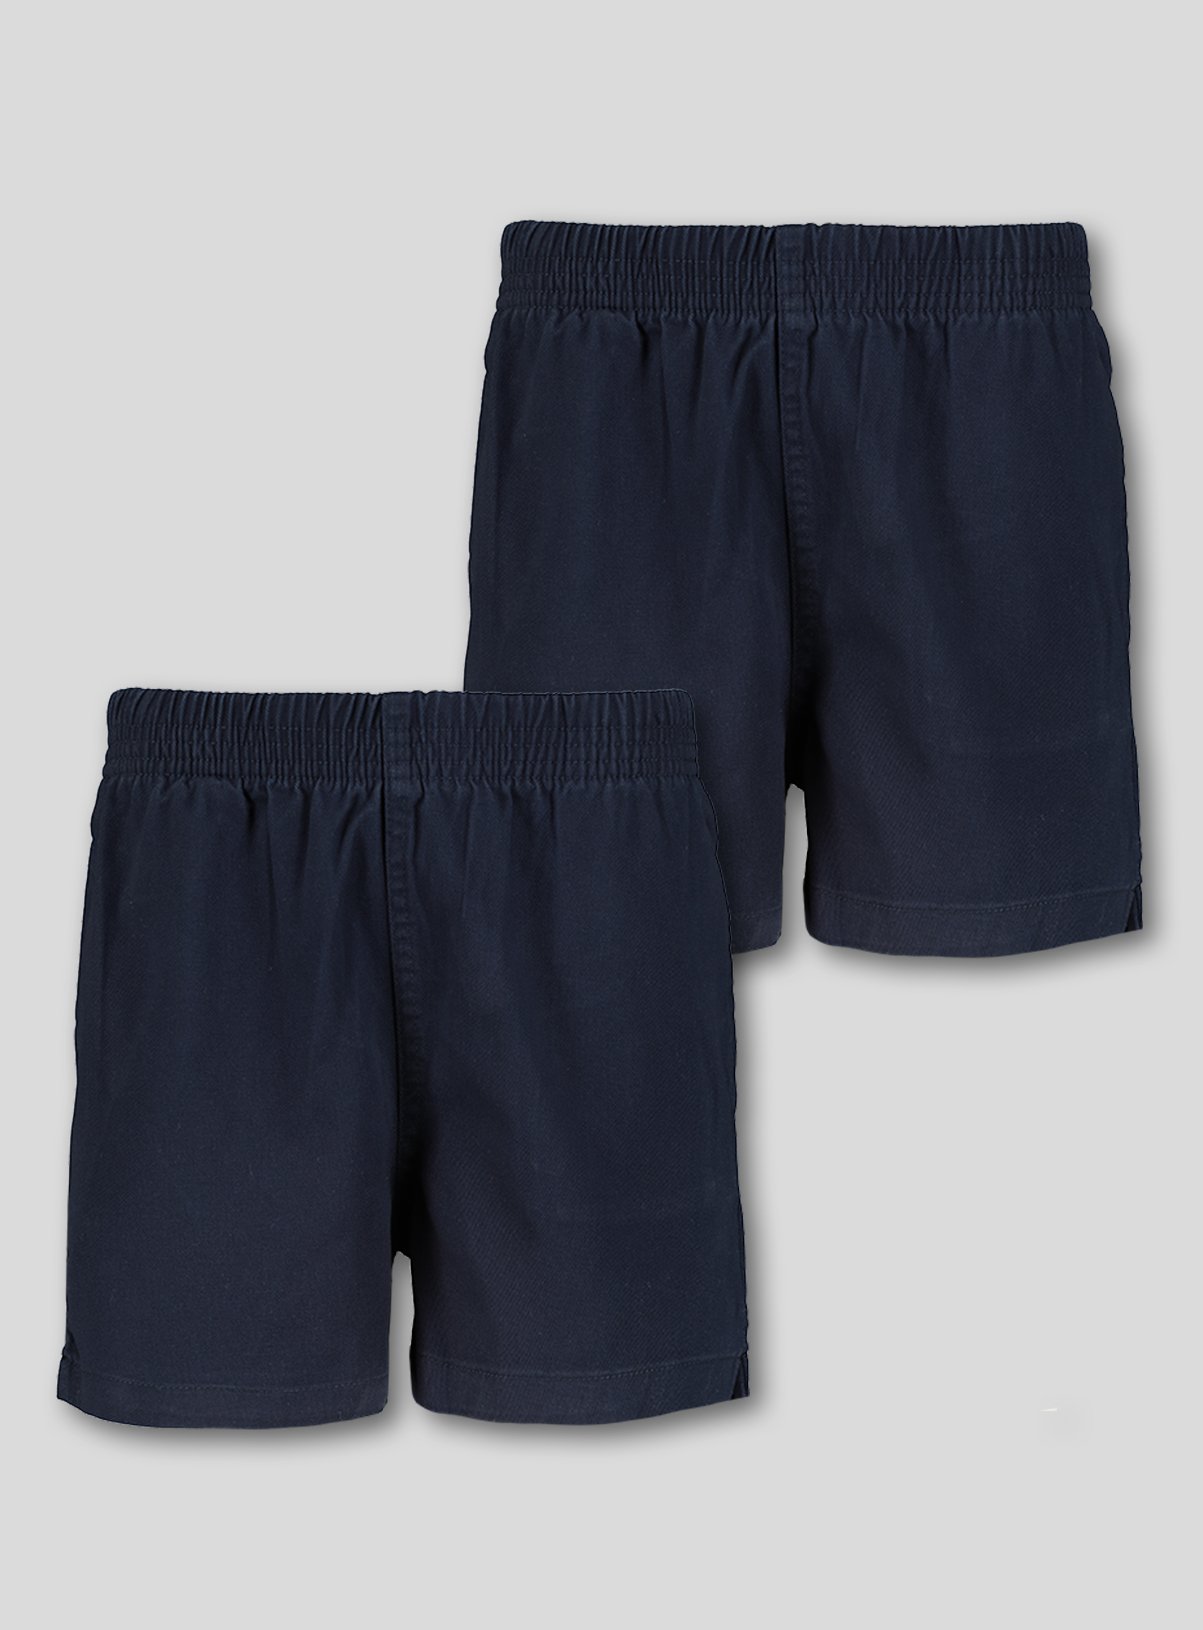 Navy Woven Rugby Shorts 2 Pack Review